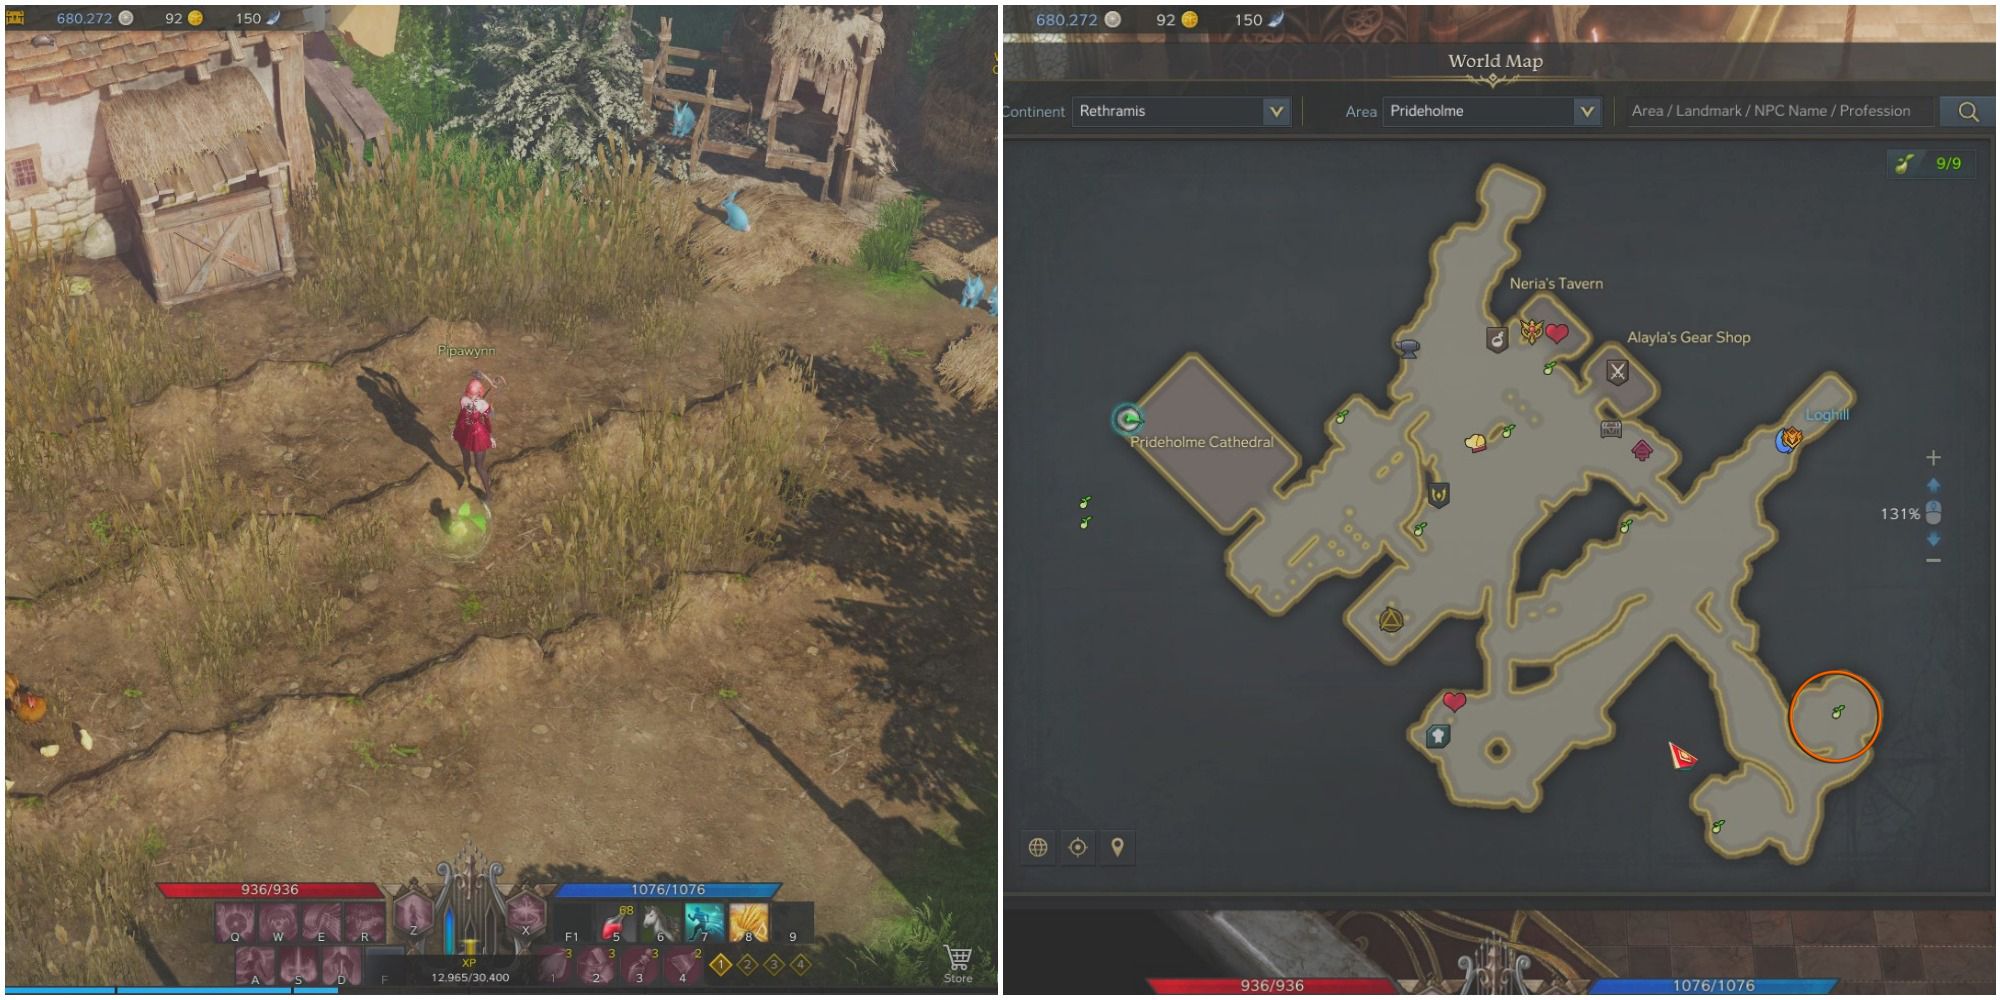 A split image of a bard standing in a field next to a mokoko seed and a map of Prideholme